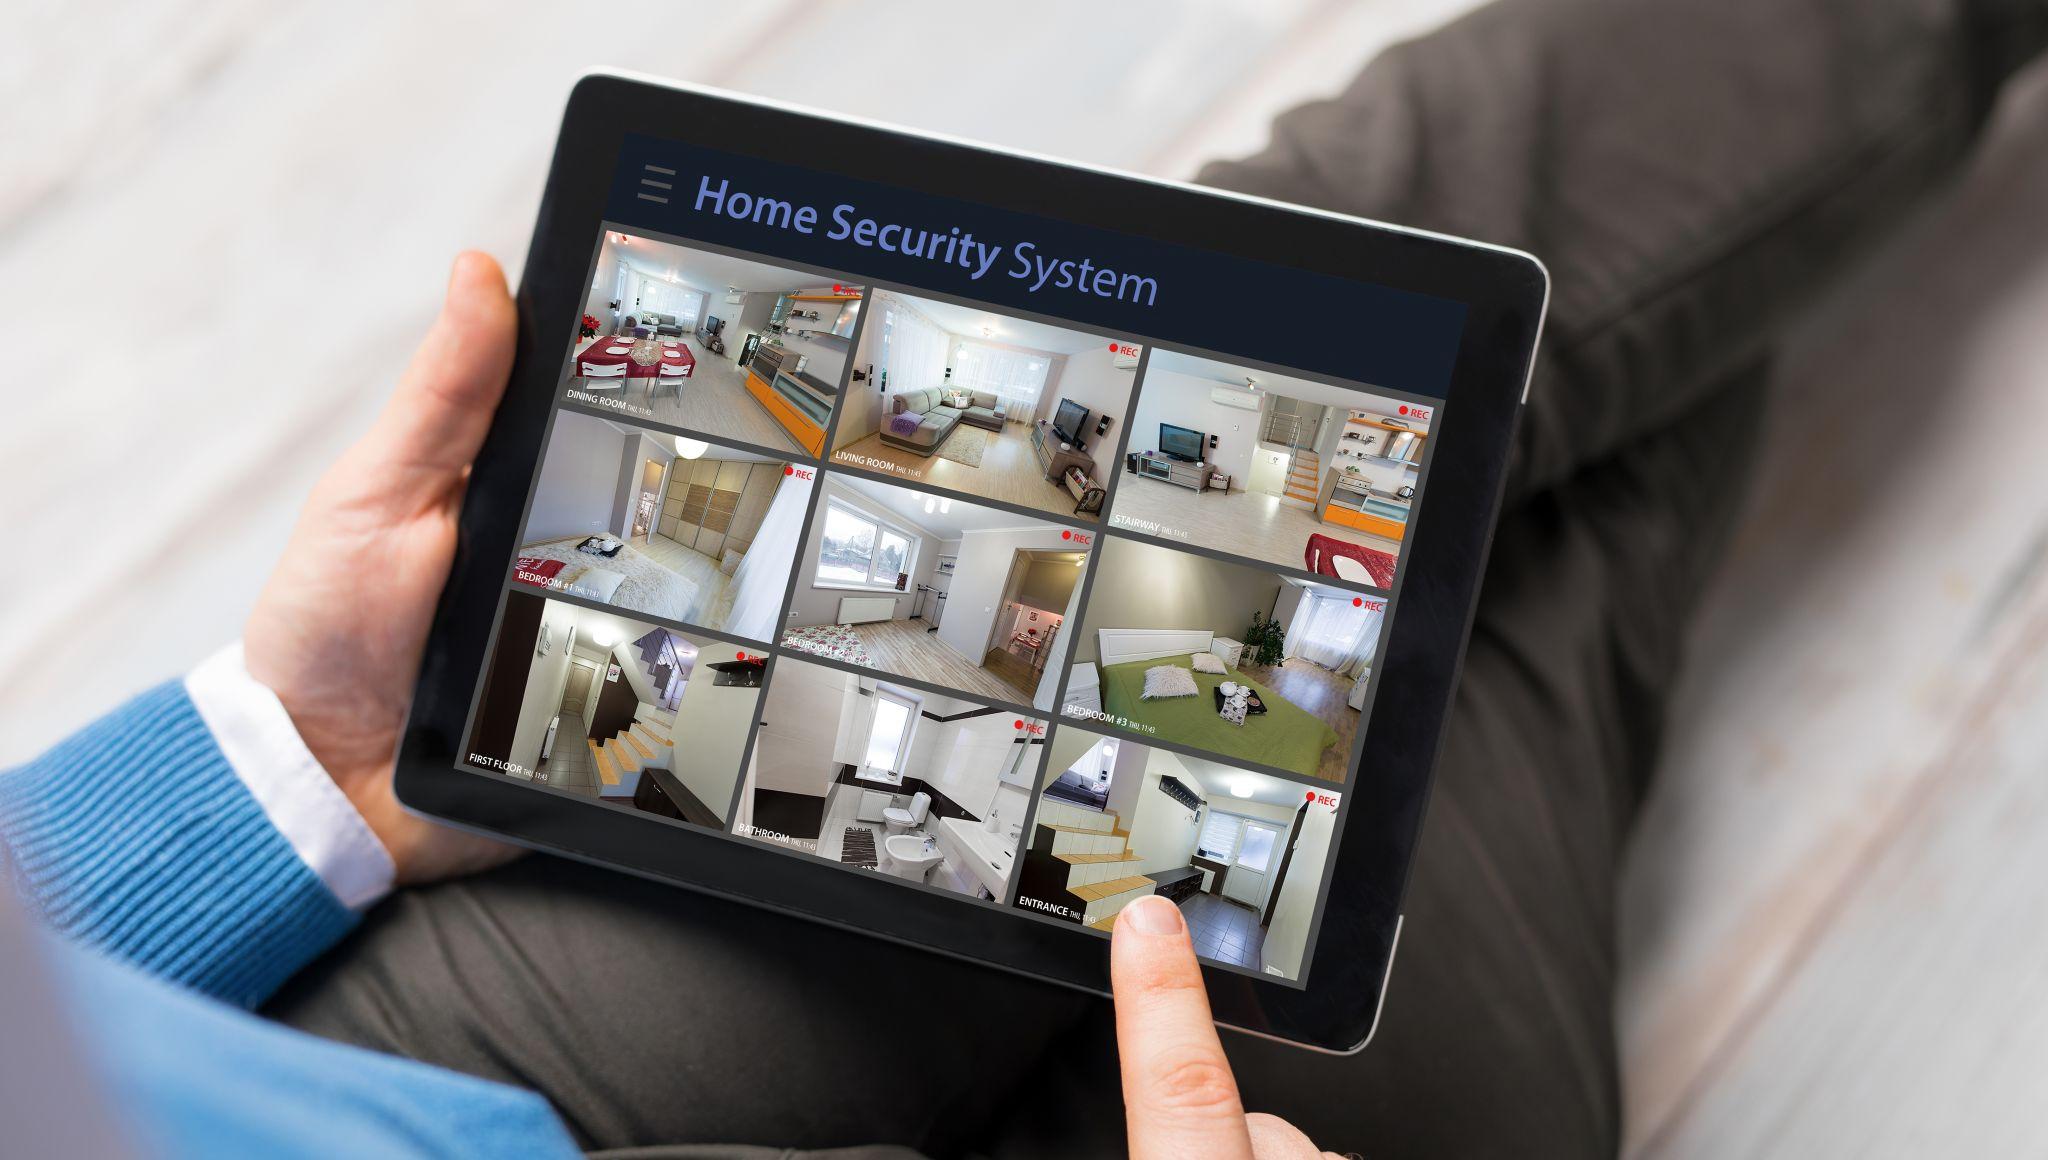 CCTV vs. Smart Home Security Systems: Which is Better